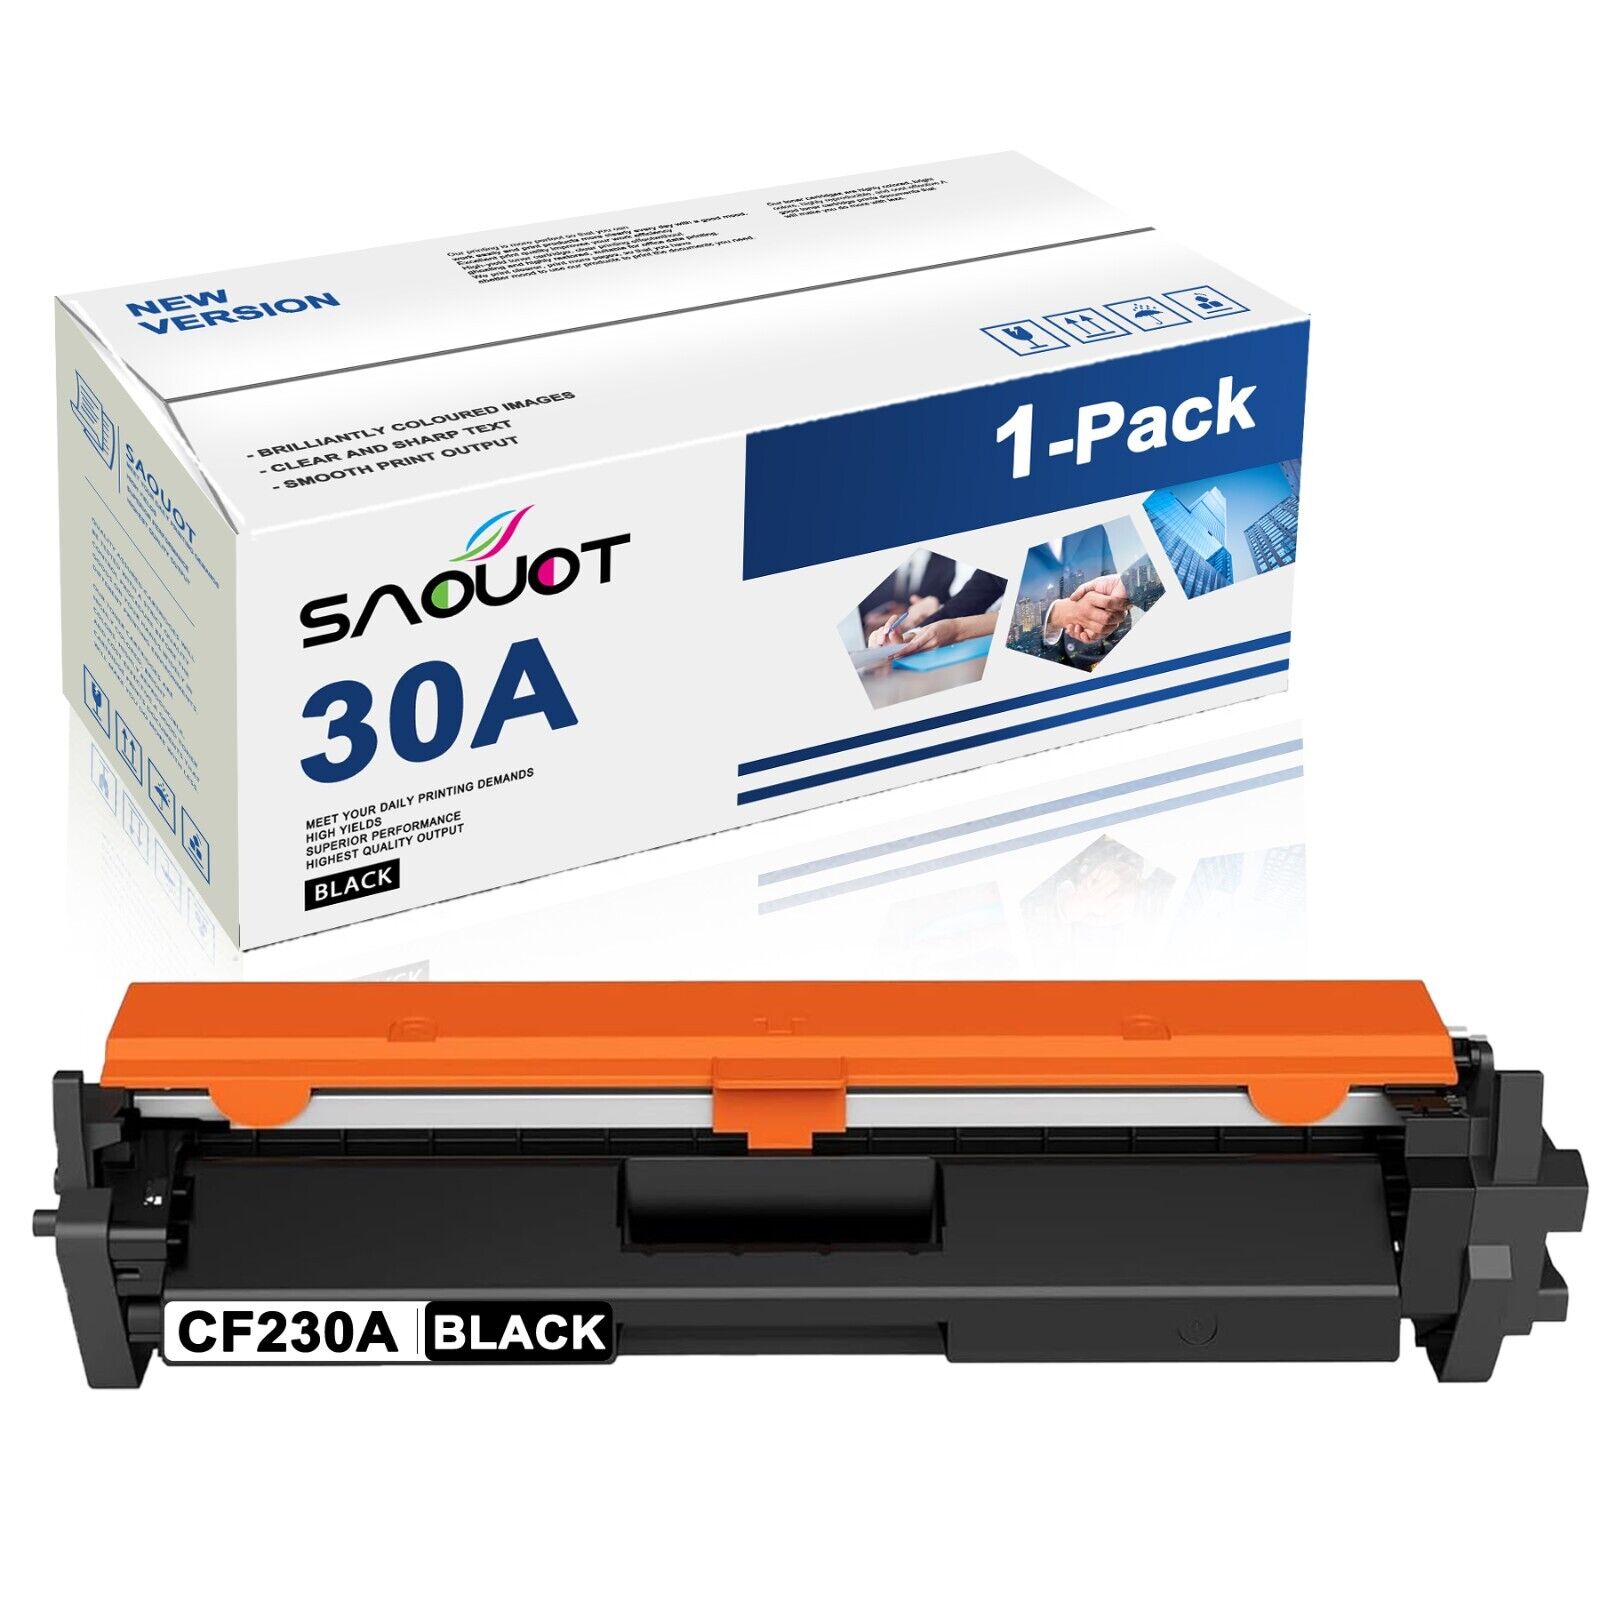 30A Toner Cartridge Black New Replacement for HP CF230A Pro MFP M227fdw